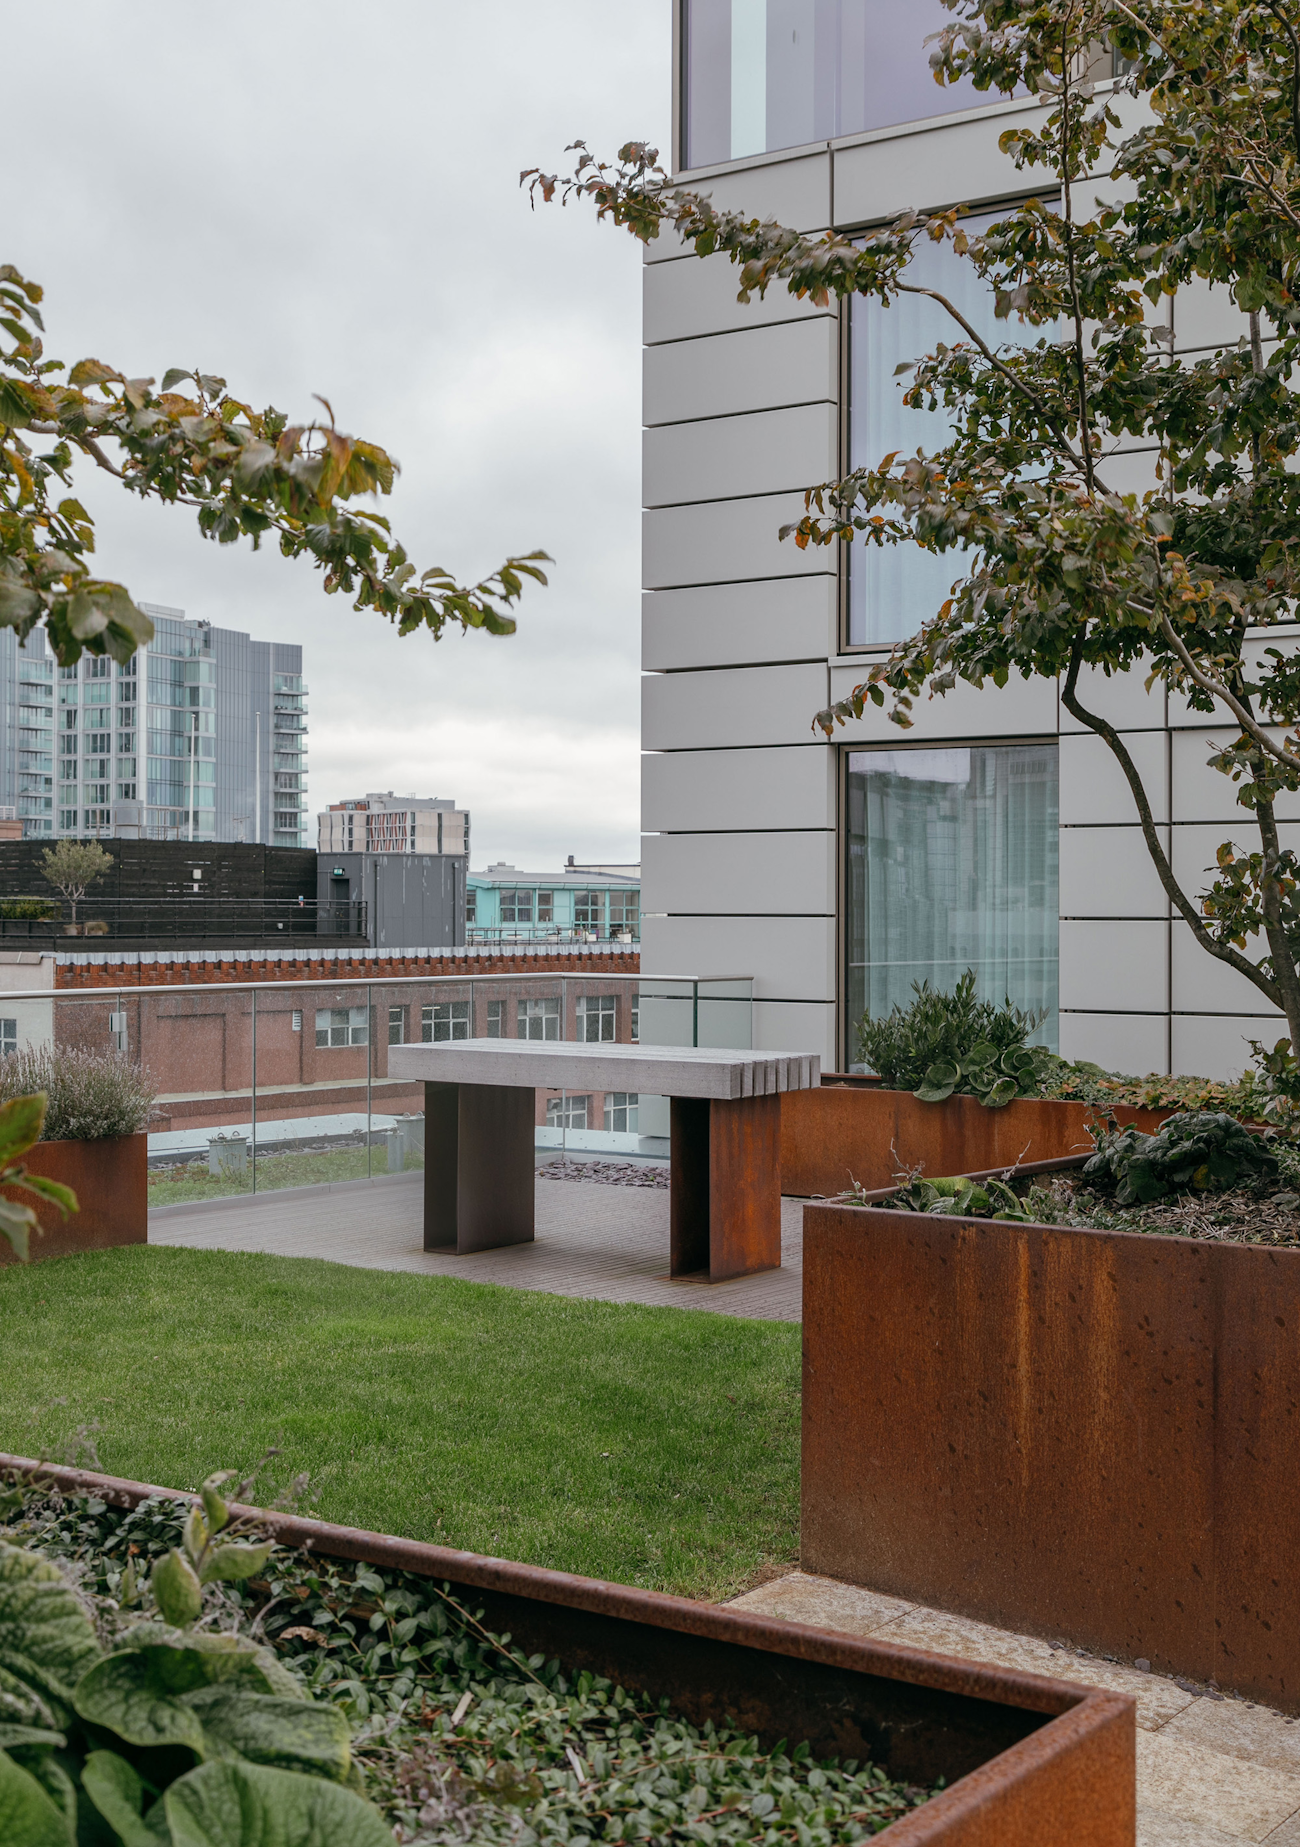 Corten steel planters and timber bench at Royal Mint Gardens